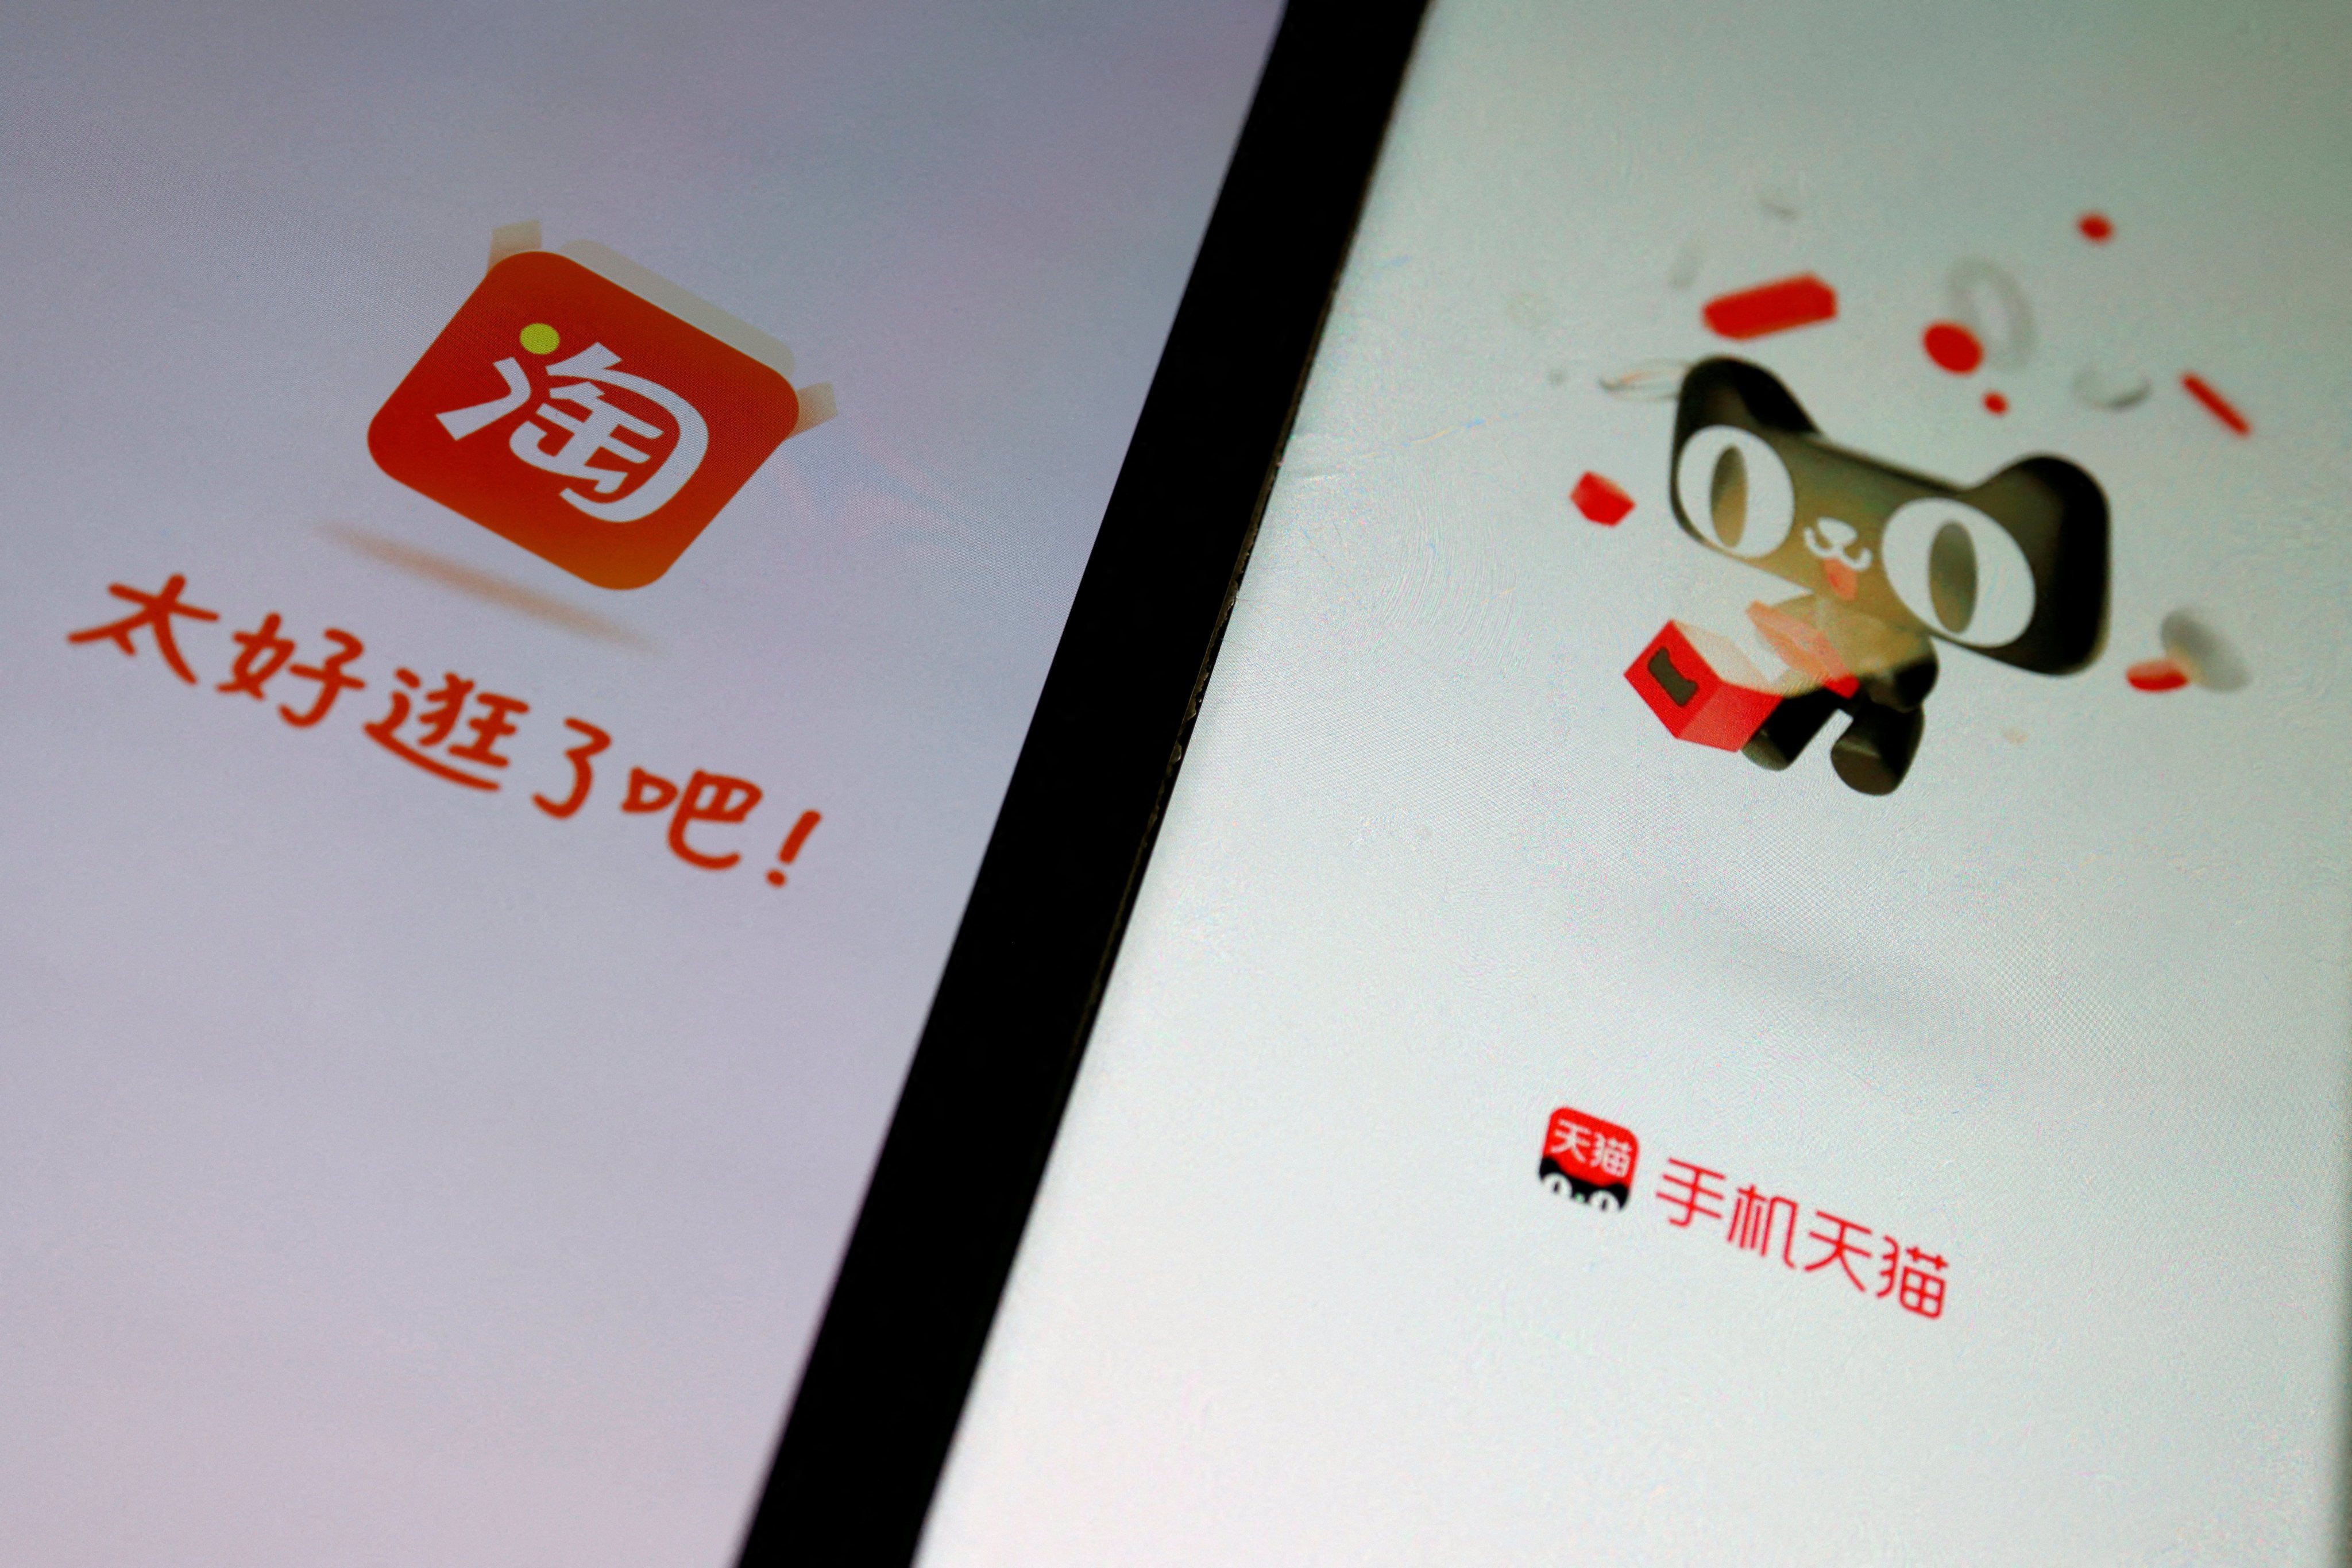 Alibaba Group Holding’s e-commerce apps Taobao and Tmall are at the forefront of the company’s 618 shopping festival promotions. Photo: Reuters